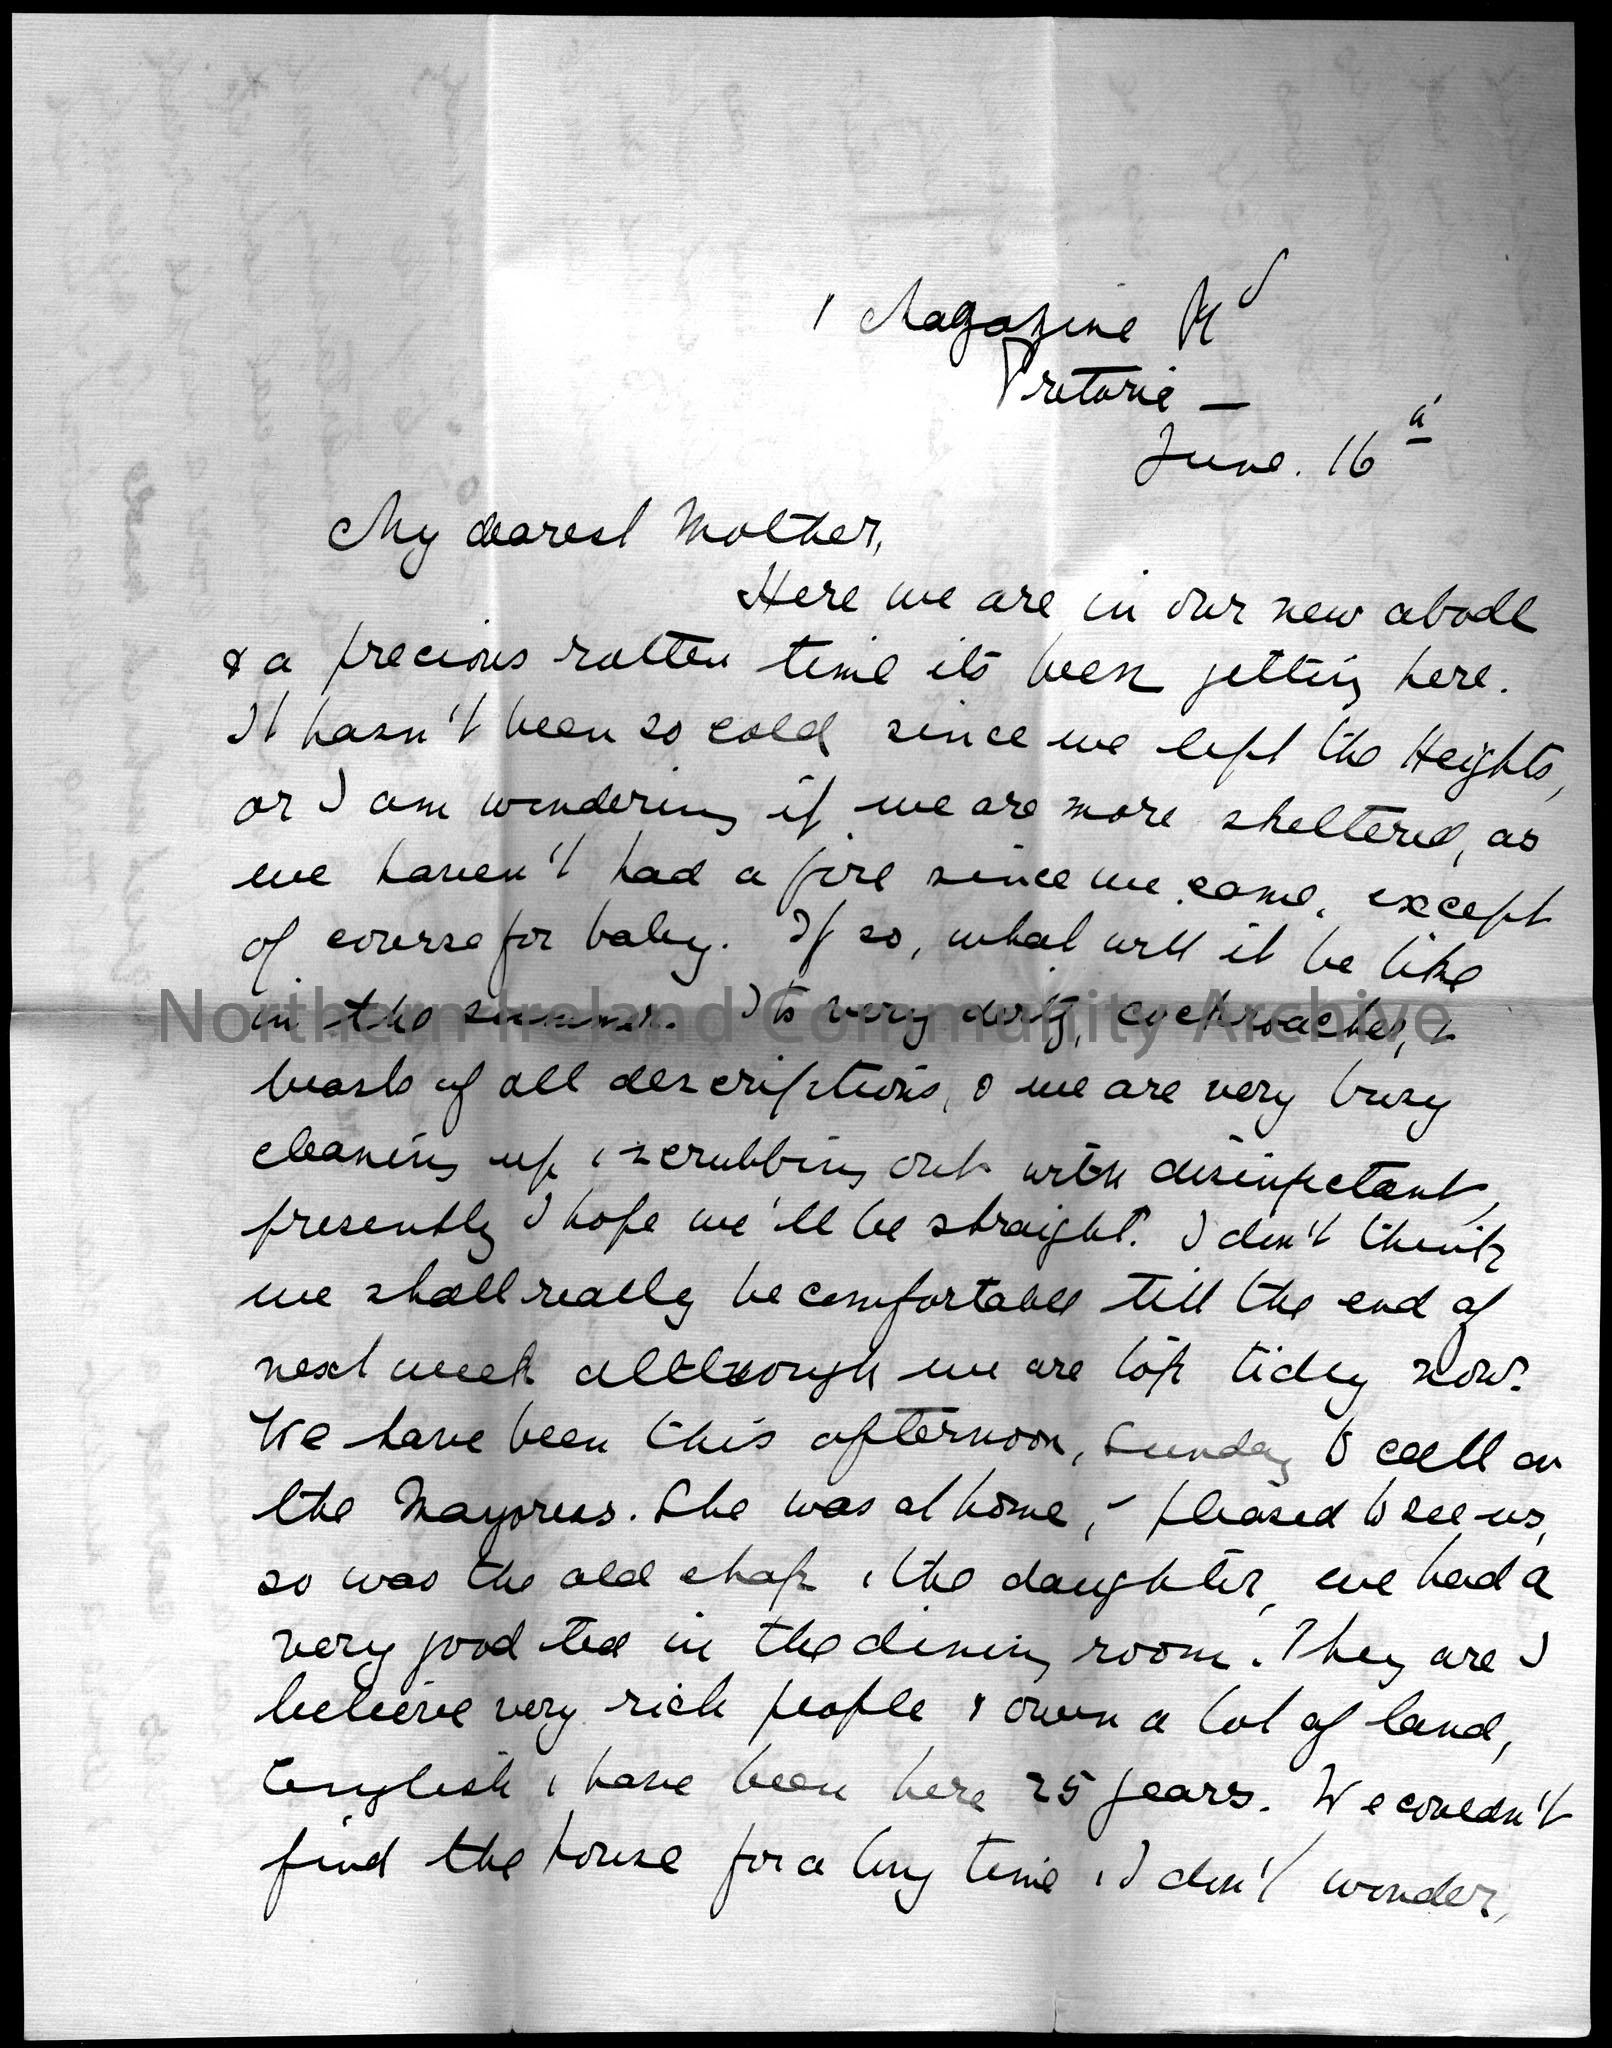 letter from Lady Dorothy Arter Hezlet to her mother from 1 Magazine Road, Pretoria, June 16th. Dorothy has recently moved to Magazine Road, Pretoria f…